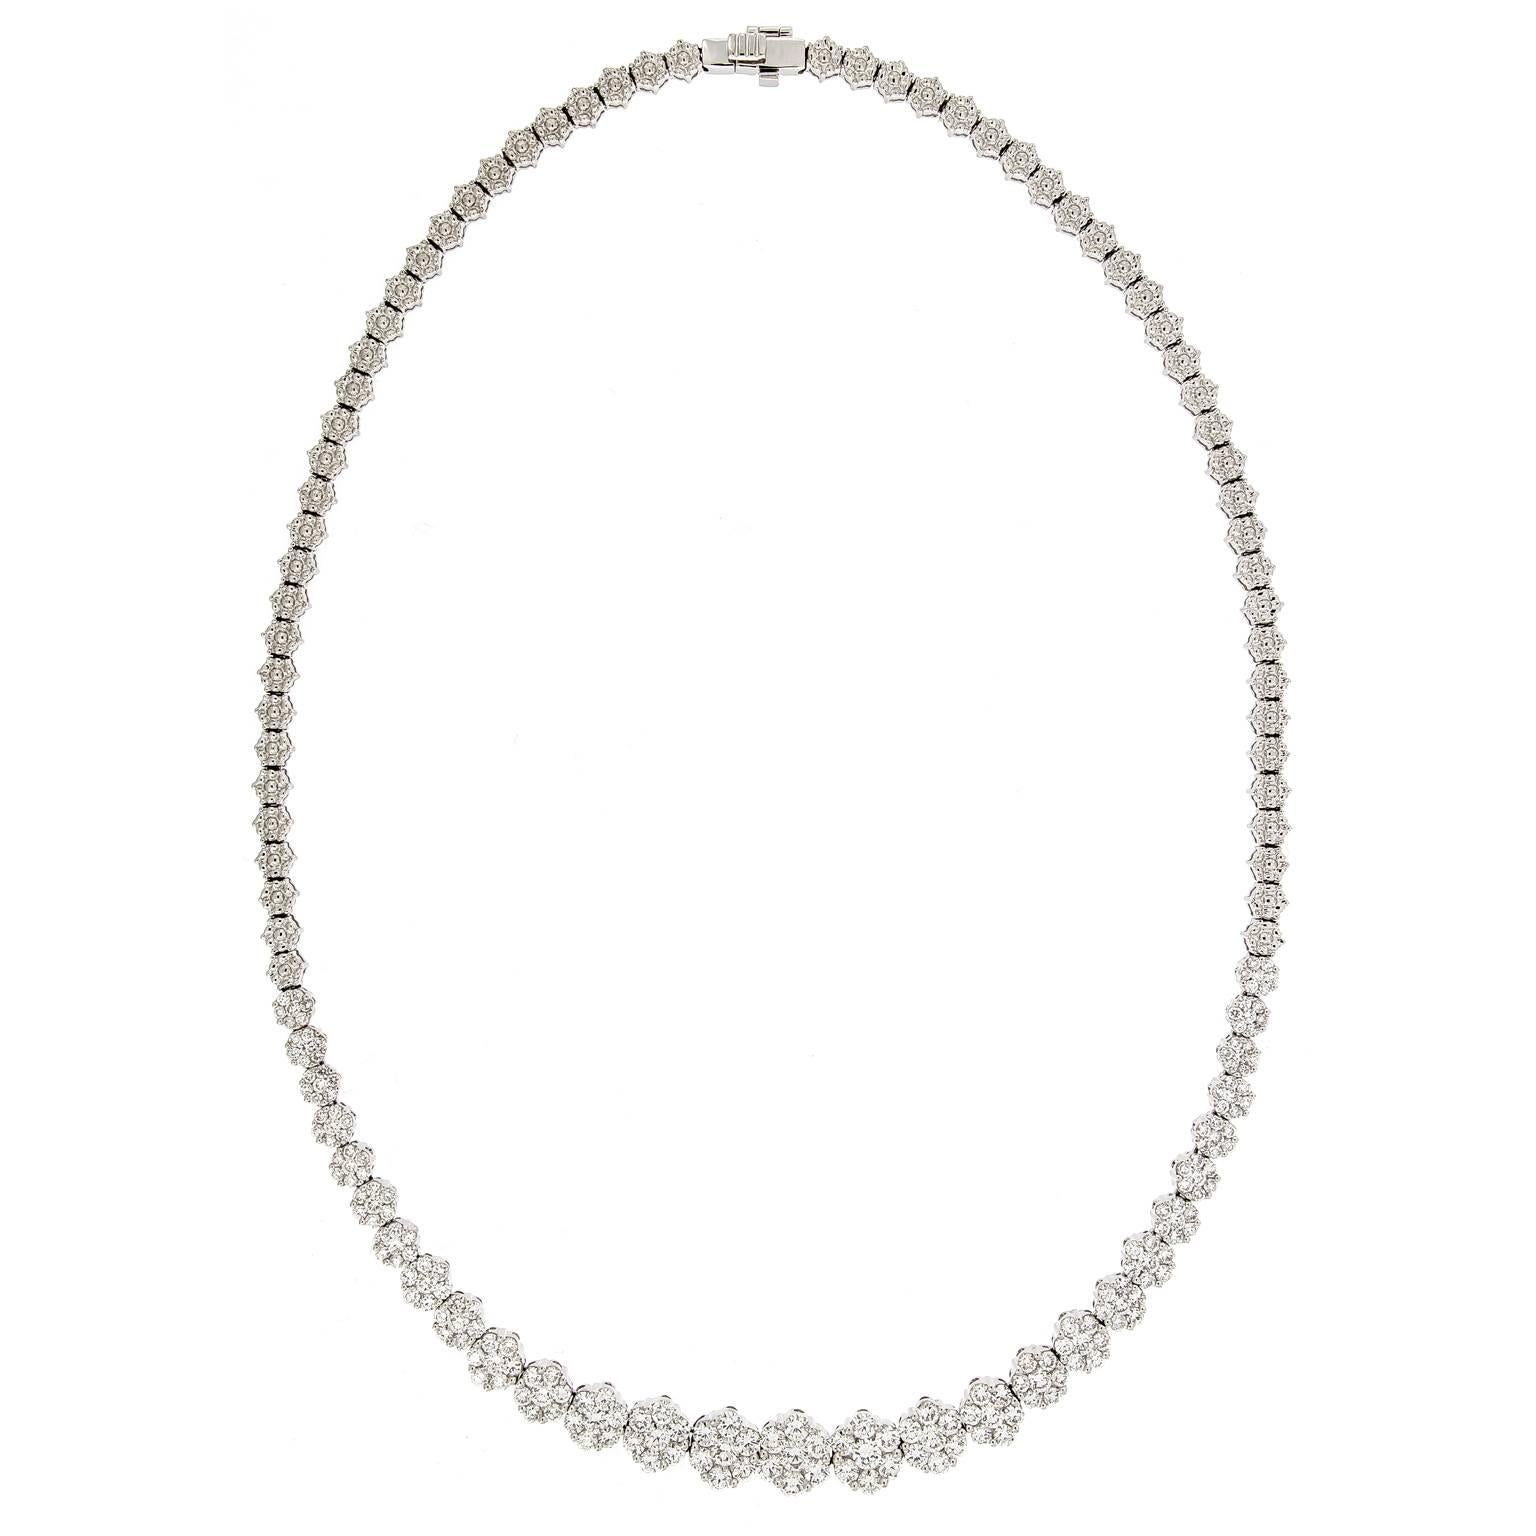 Delicately resting upon her neck, this masterpiece of shimmering diamond flower buds is set in 18k white gold. Necklace features 18k white gold flower bud links that flow into 7.0 cttw of round diamonds.